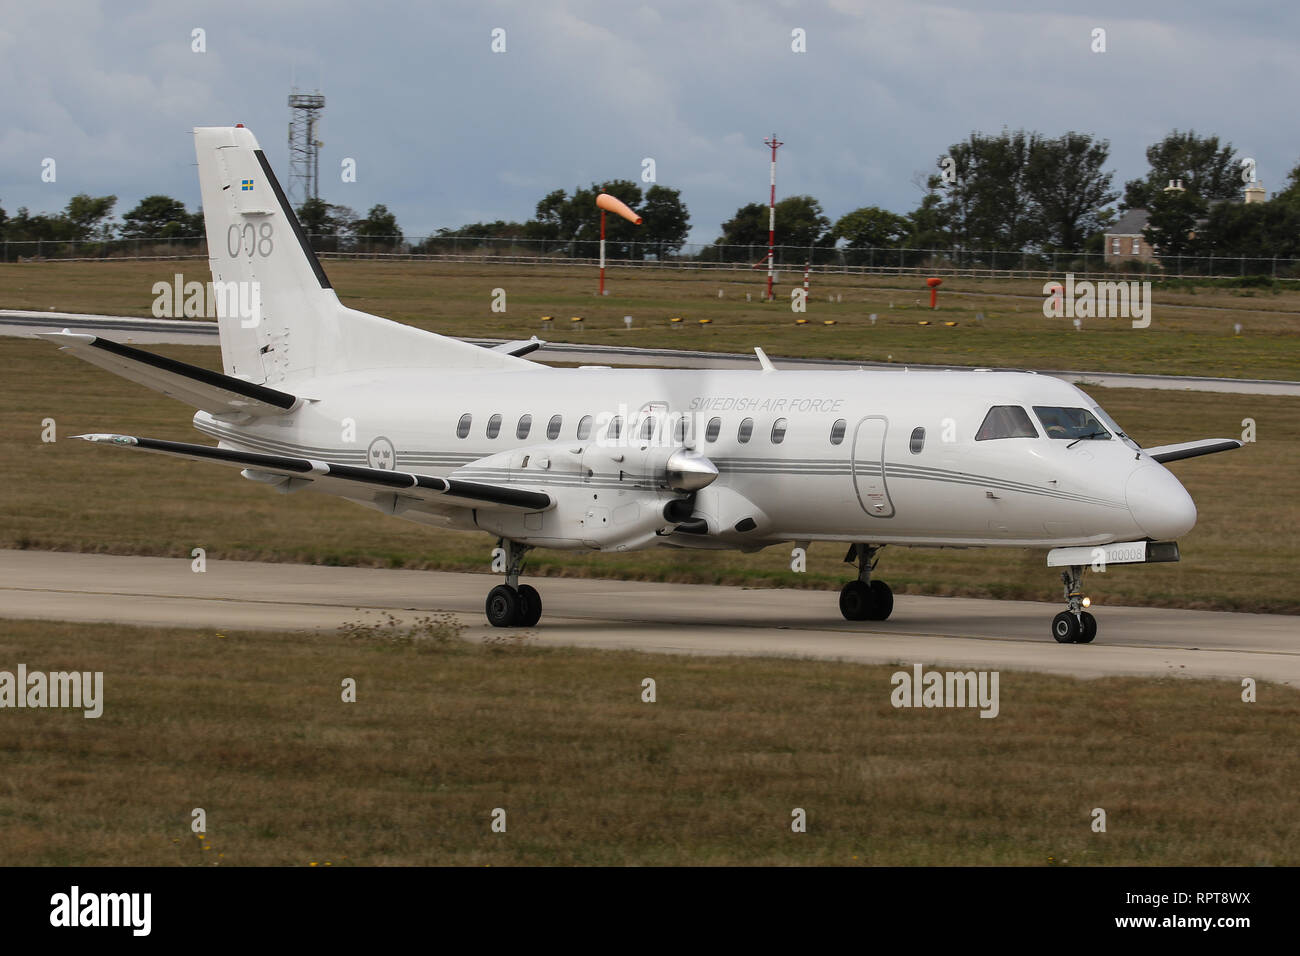 A Saab 340 (008), operated by the Swedish Air Force takes-off from Jersey Airport Stock Photo